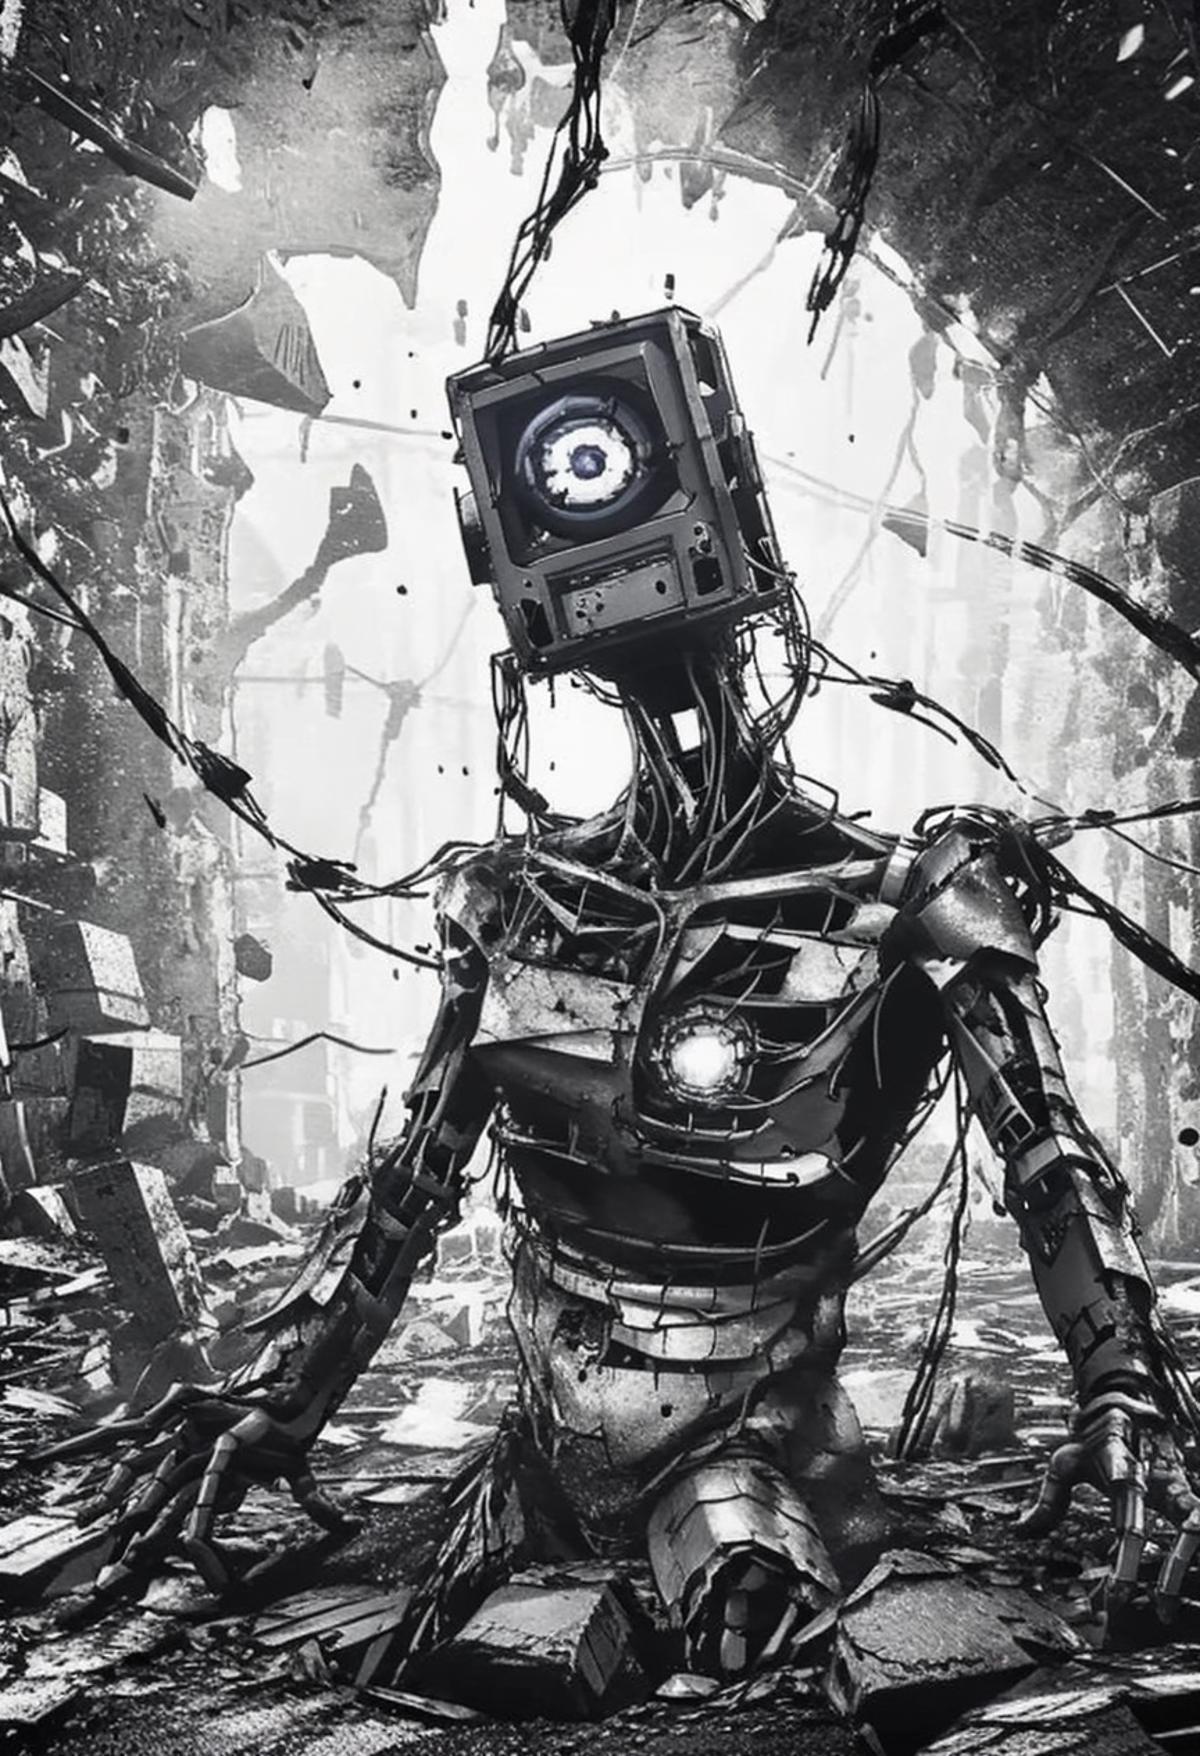 A robot with a camera for a head, surrounded by a destroyed city.